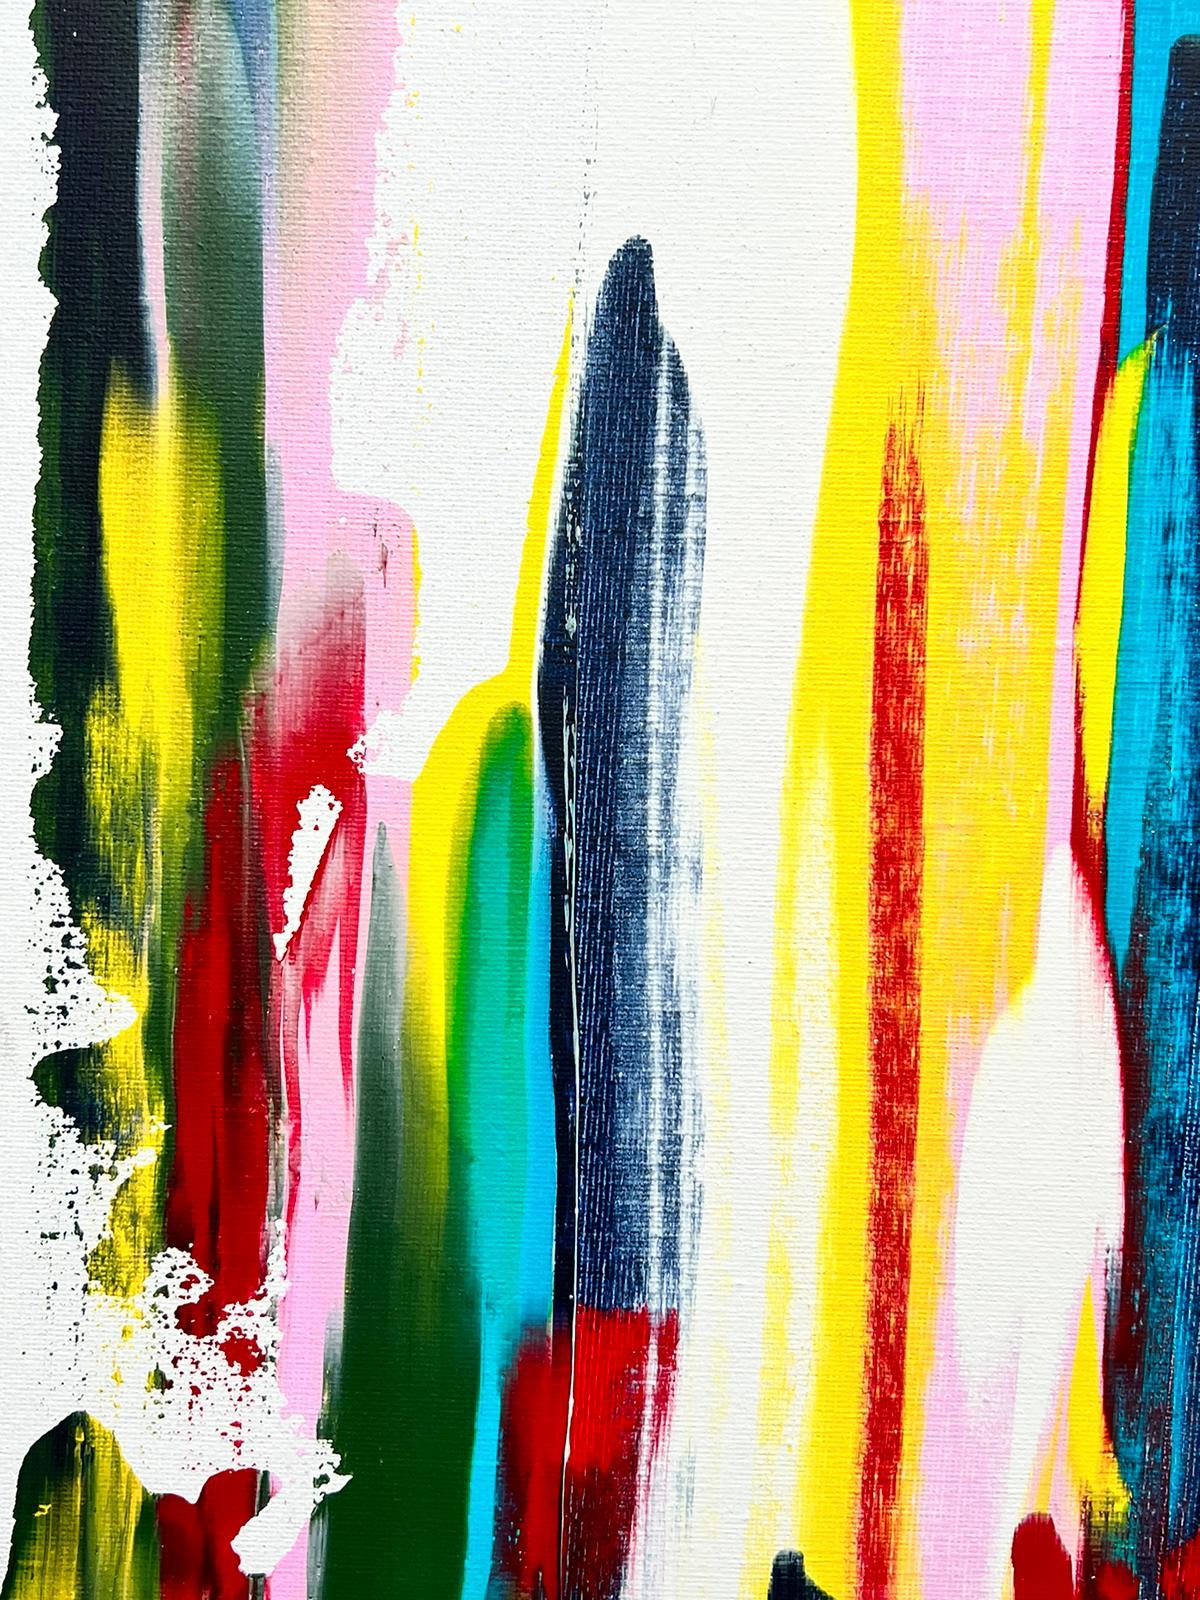 Colorful Abstract
by Bolly Frost
Acrylic painting on canvas 
signed
painting: 20 x 18 inches  

Superb original modern abstract portrait painting by the rising contemporary British painter, Bolly Frost . Incredible infusion of colours, blurred